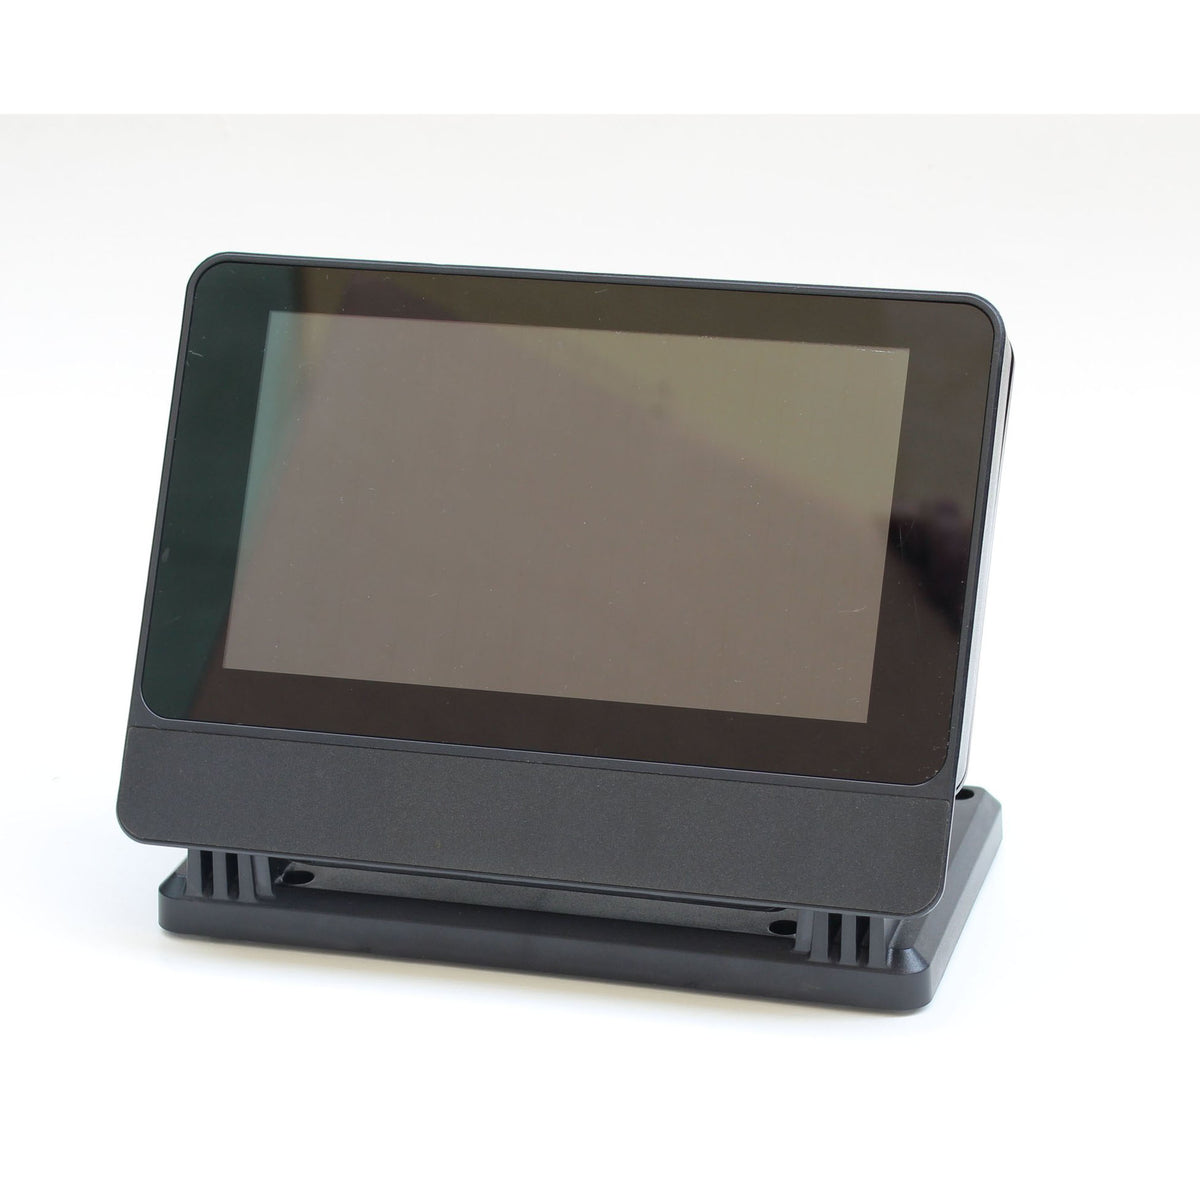 Snelkoppelingen Vuil dek SmartiPi Touch Pro - compatible with the Raspberry Pi Official Display